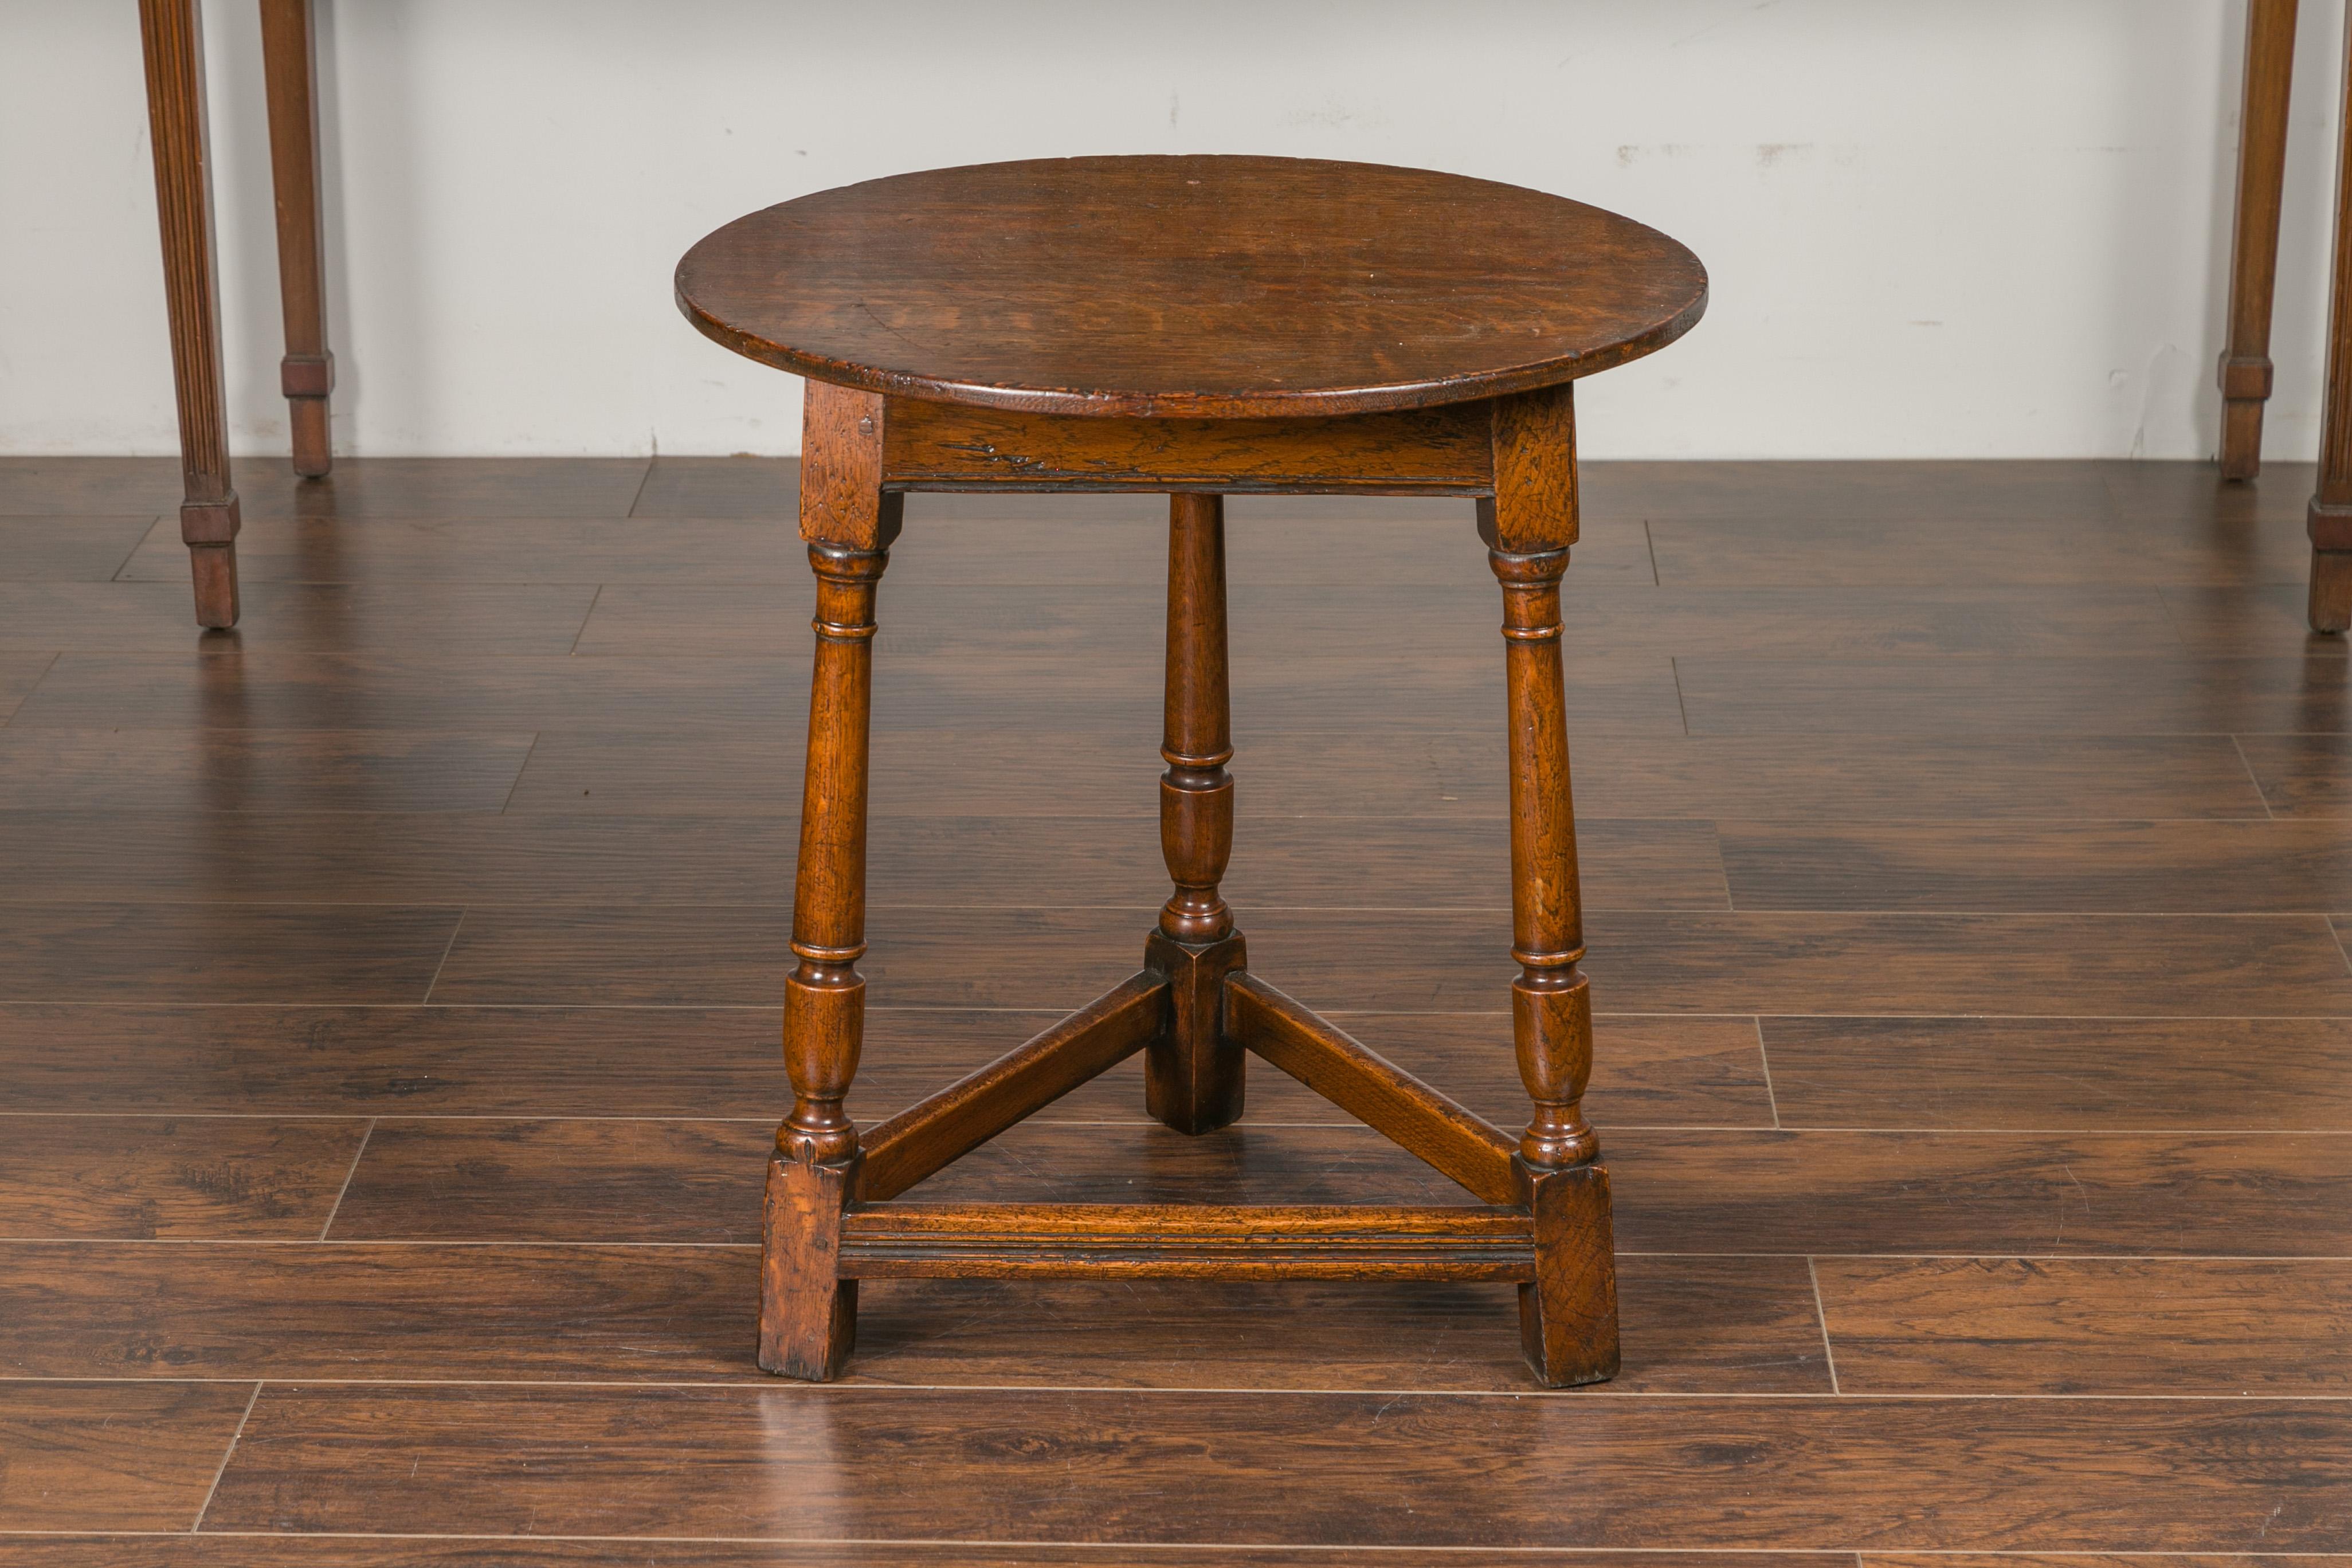 An English oak cricket table from the mid-19th century, with circular top, turned legs and stretchers. Born in England during the second quarter of the 19th century, this oak cricket table features a circular top sitting above a triangular apron,